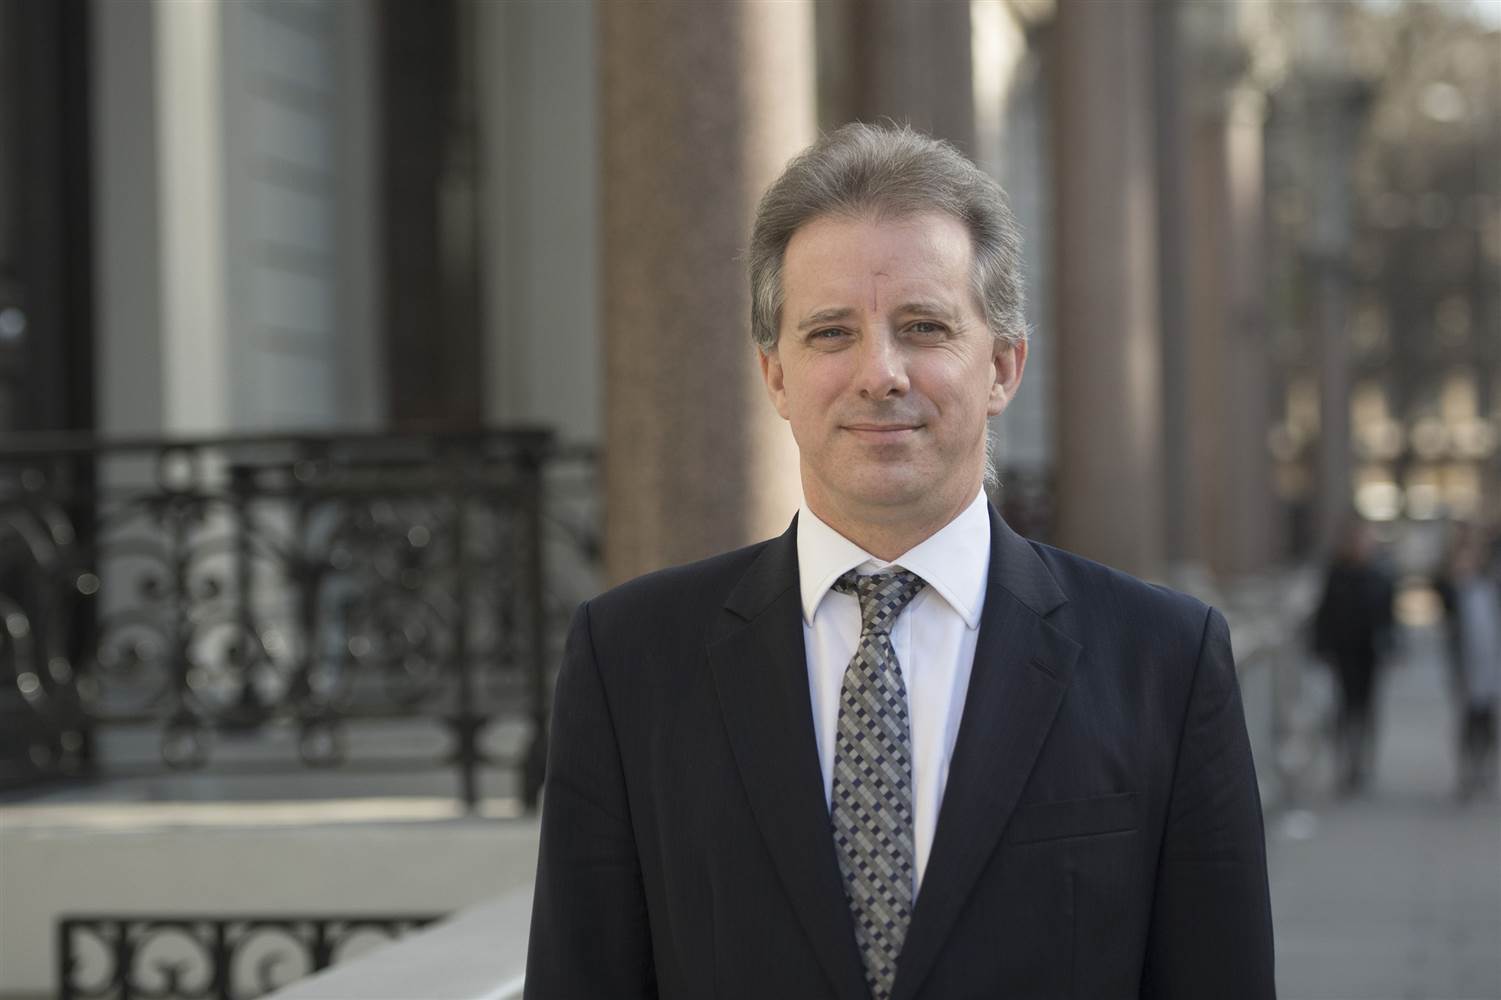 Christopher Steele, the former MI6 agent who compiled a dossier on Donald Trump, poses in London where he spoke to the media for the first time on March 7, 2017 (Victoria Jones/PA via AP)